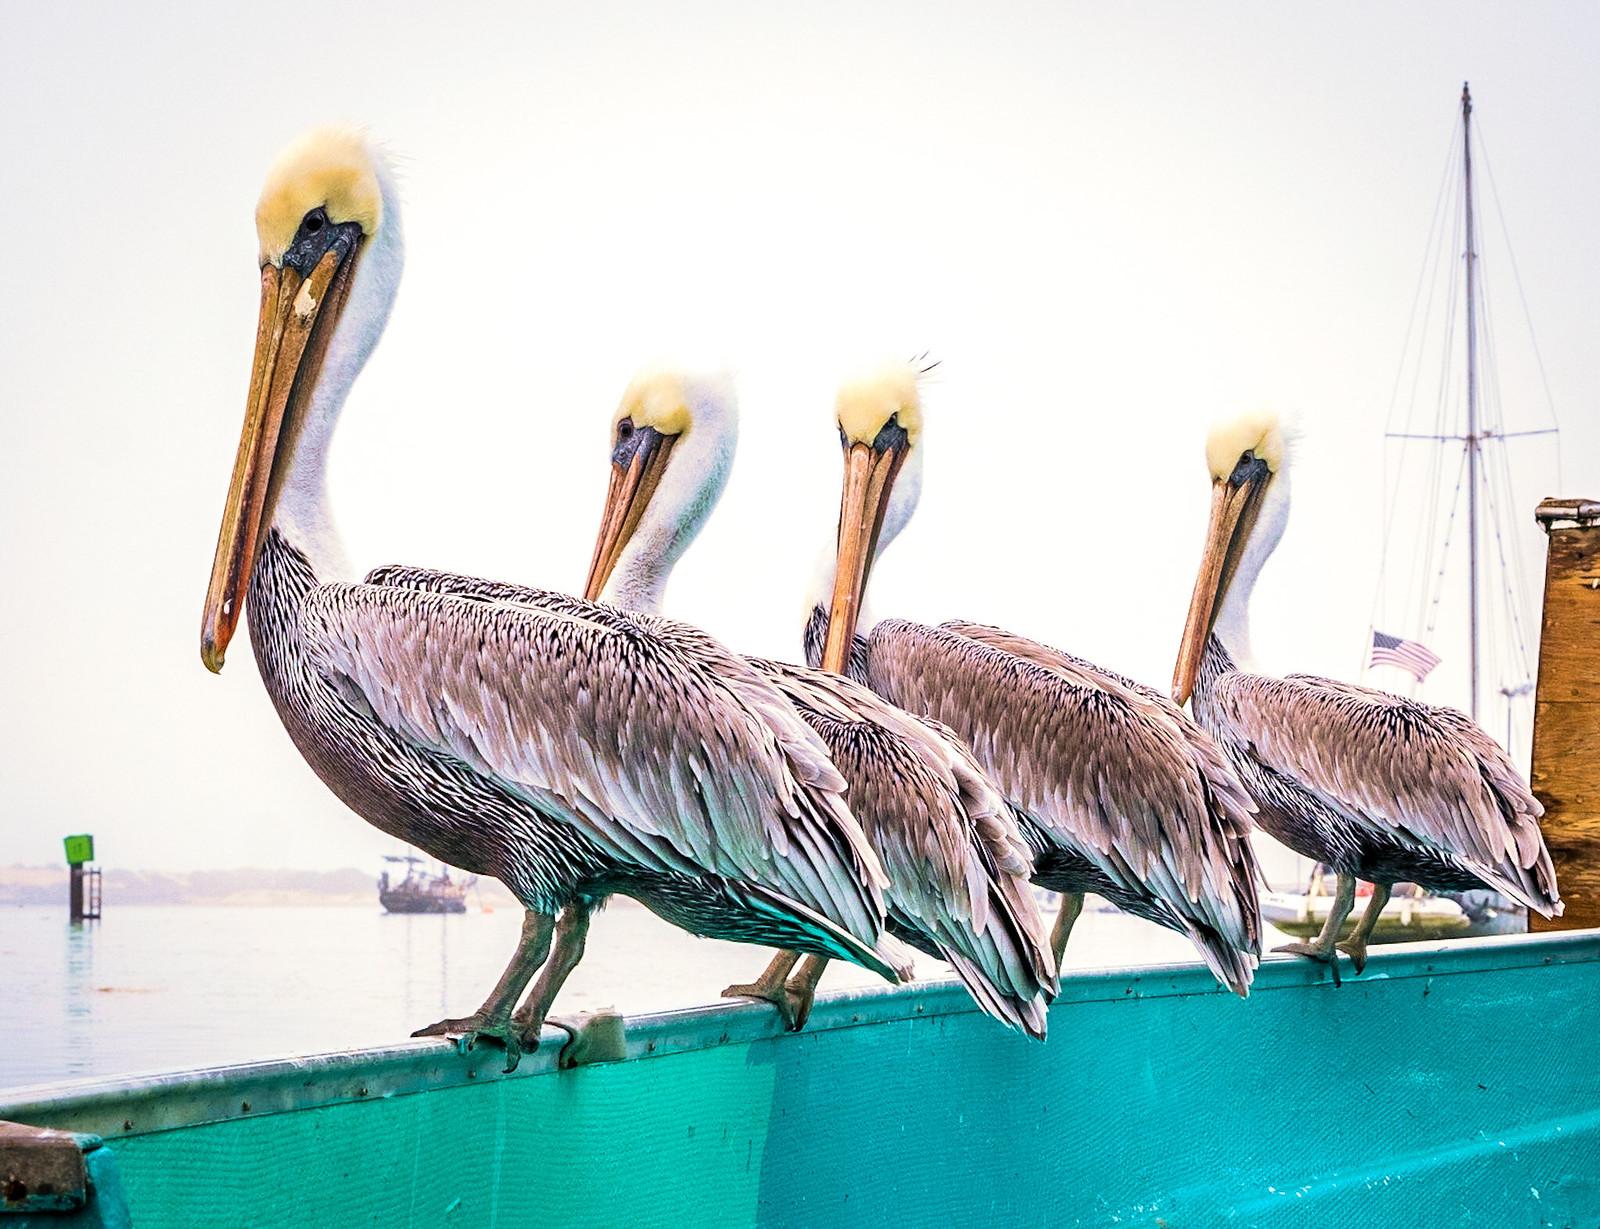 Pelicans on a skiff